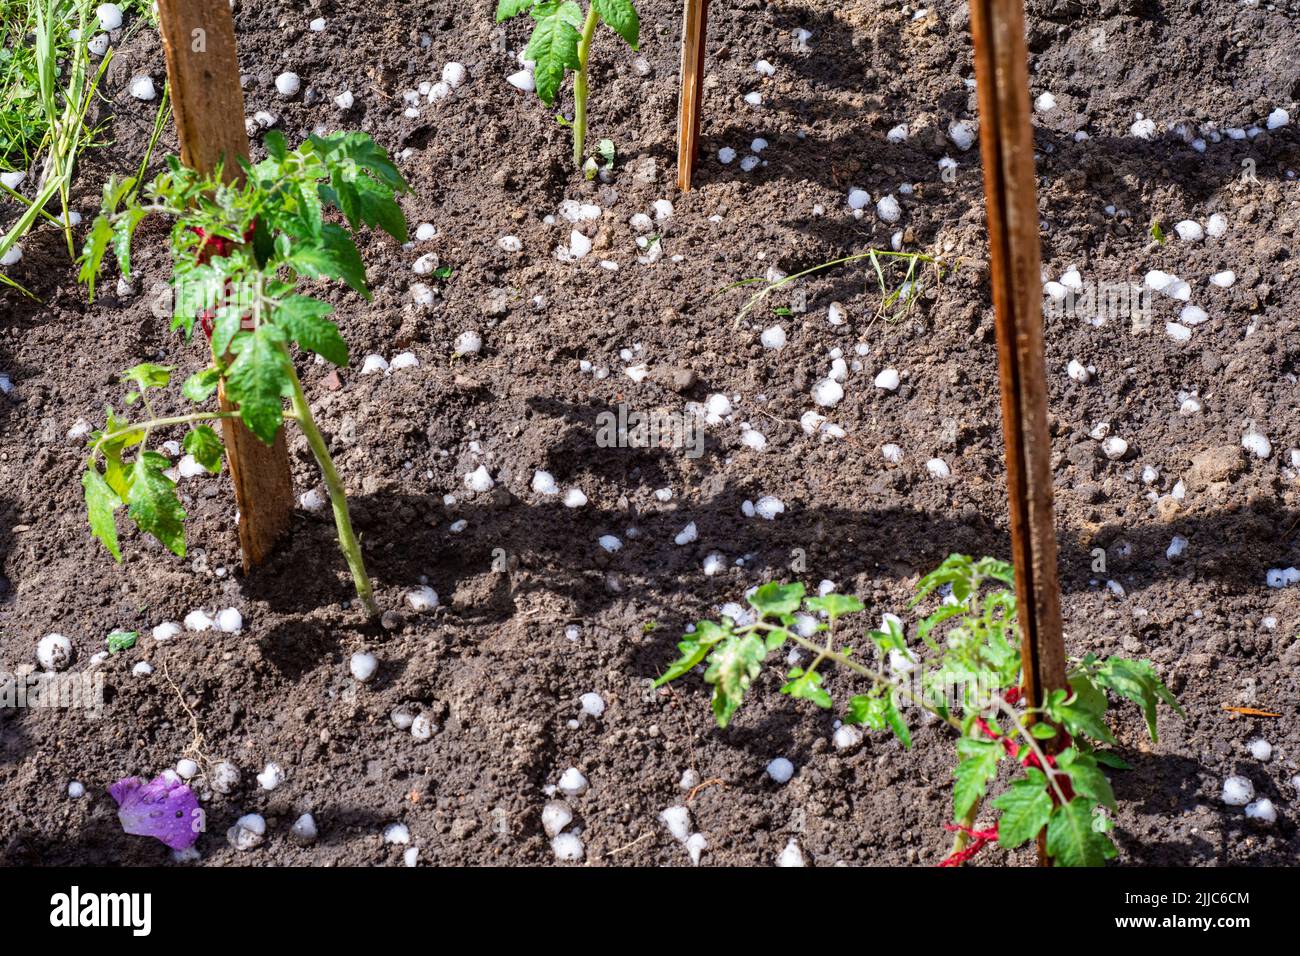 Hail falls on small plants in pots and in the ground during hot summer. Stock Photo